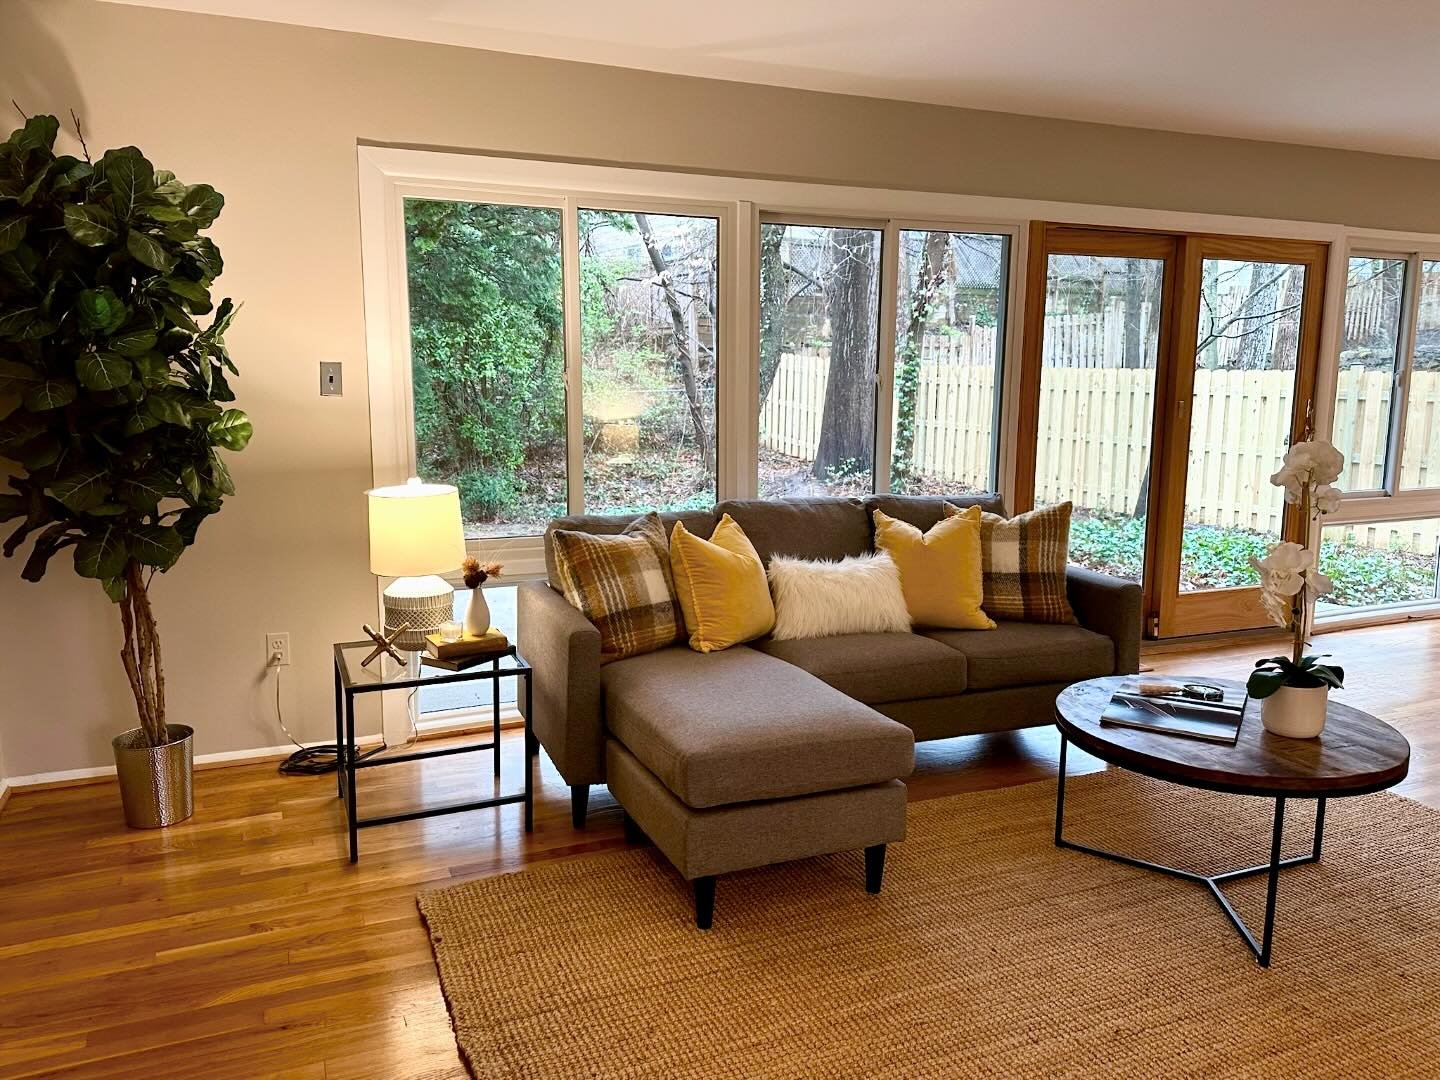 First impressions are key when it comes to #HomeStaging! Take in your first impression with a sneak peek of the entry at our most recent staging in Rockville, MD! Stay tuned, we can&rsquo;t wait to share with you!

P.S. did you guess yellow based on 